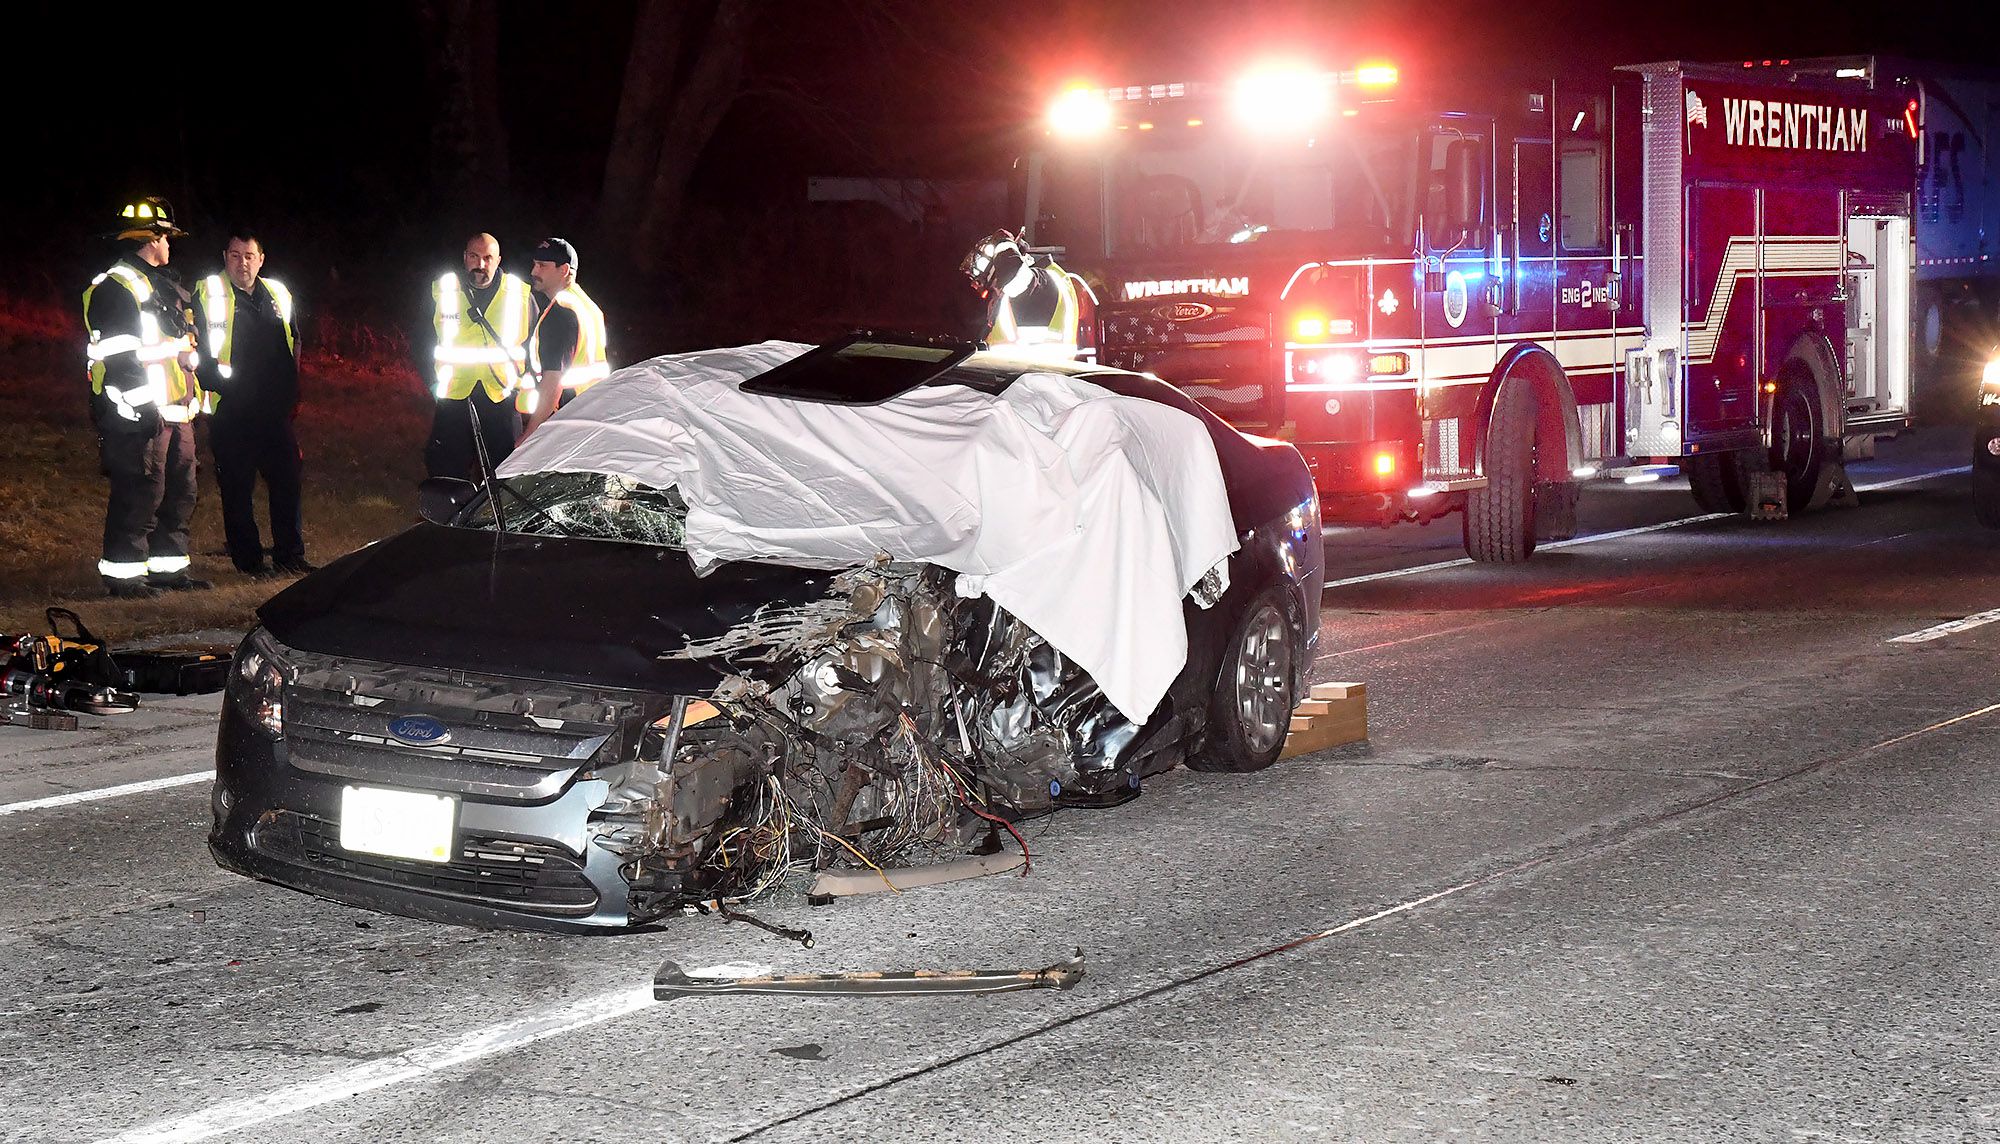 25 Year Old Woman Killed In Wrentham Crash